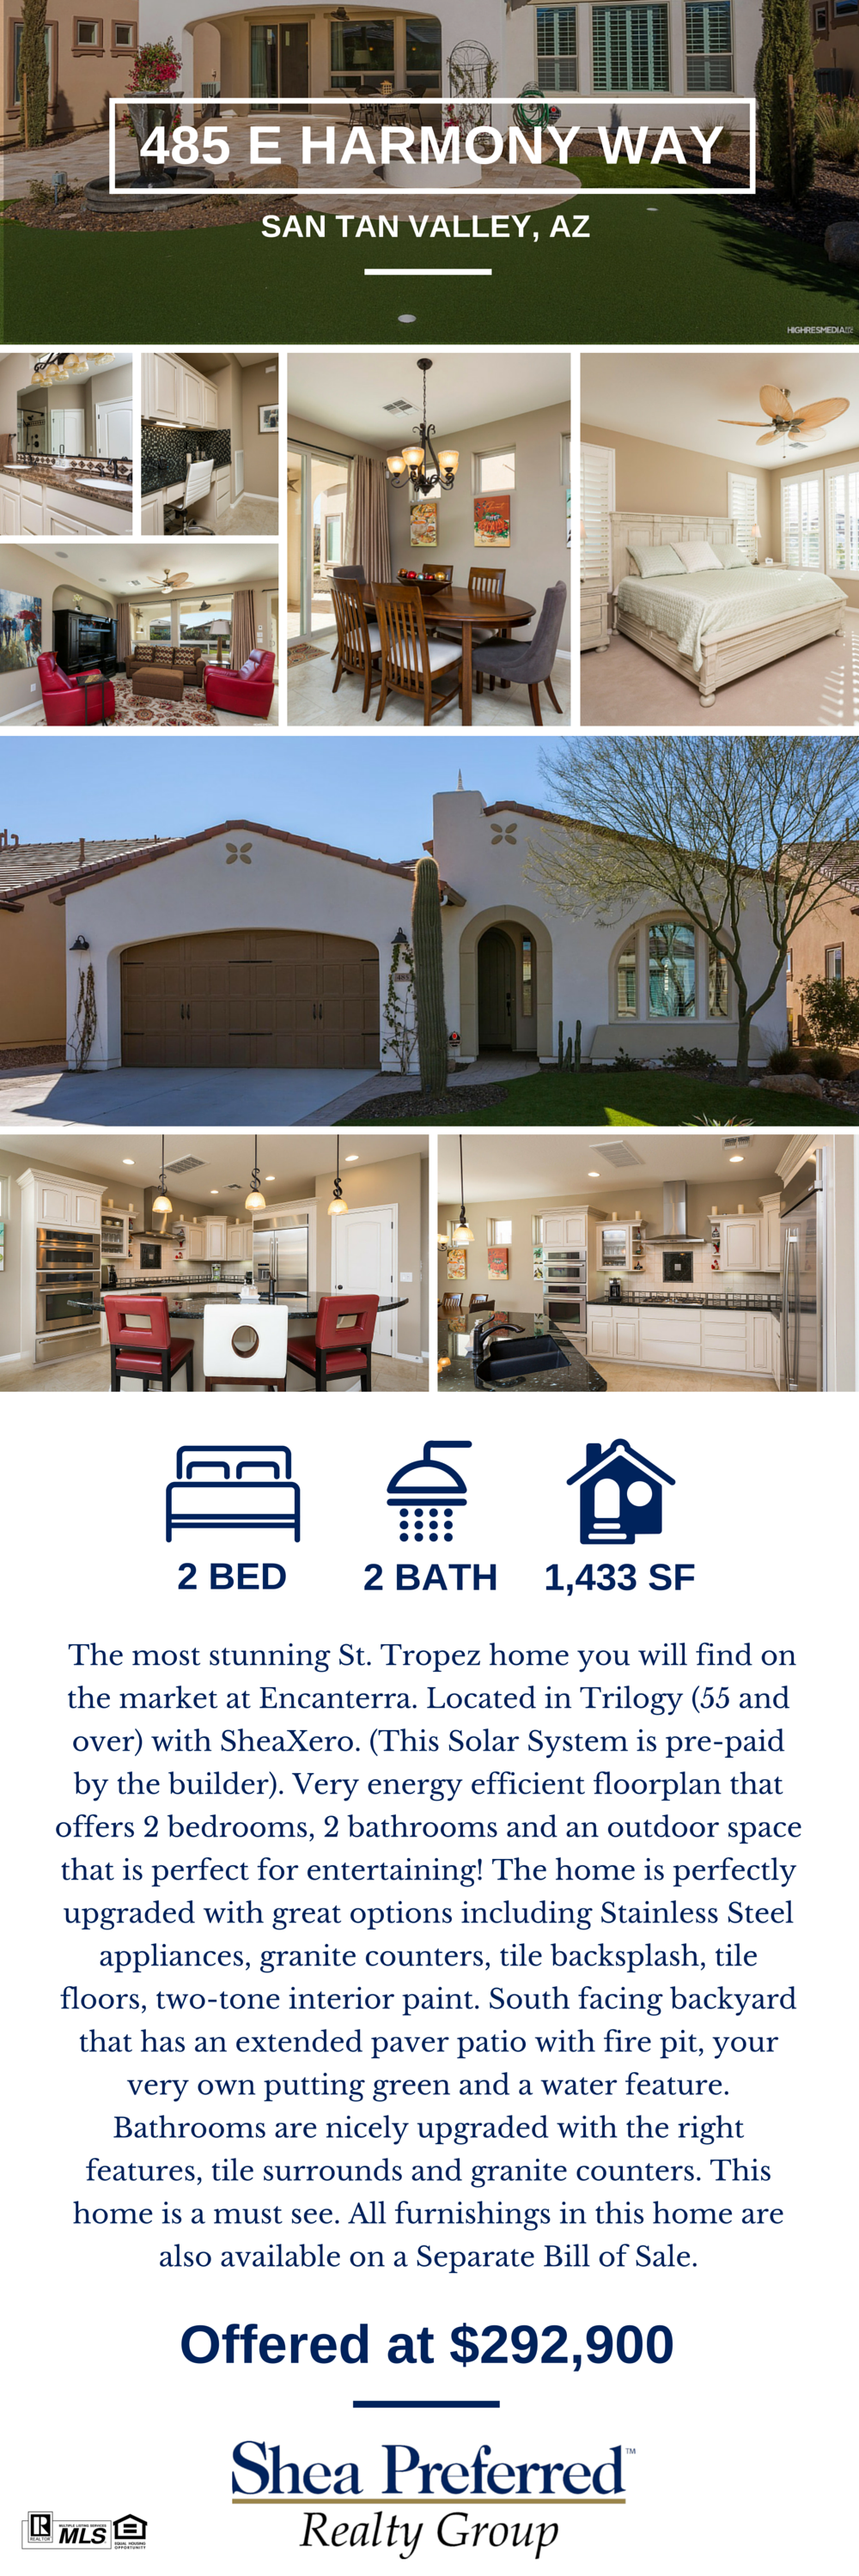 SP Featured Listing | 485 E. Harmony Way, San Tan Valley